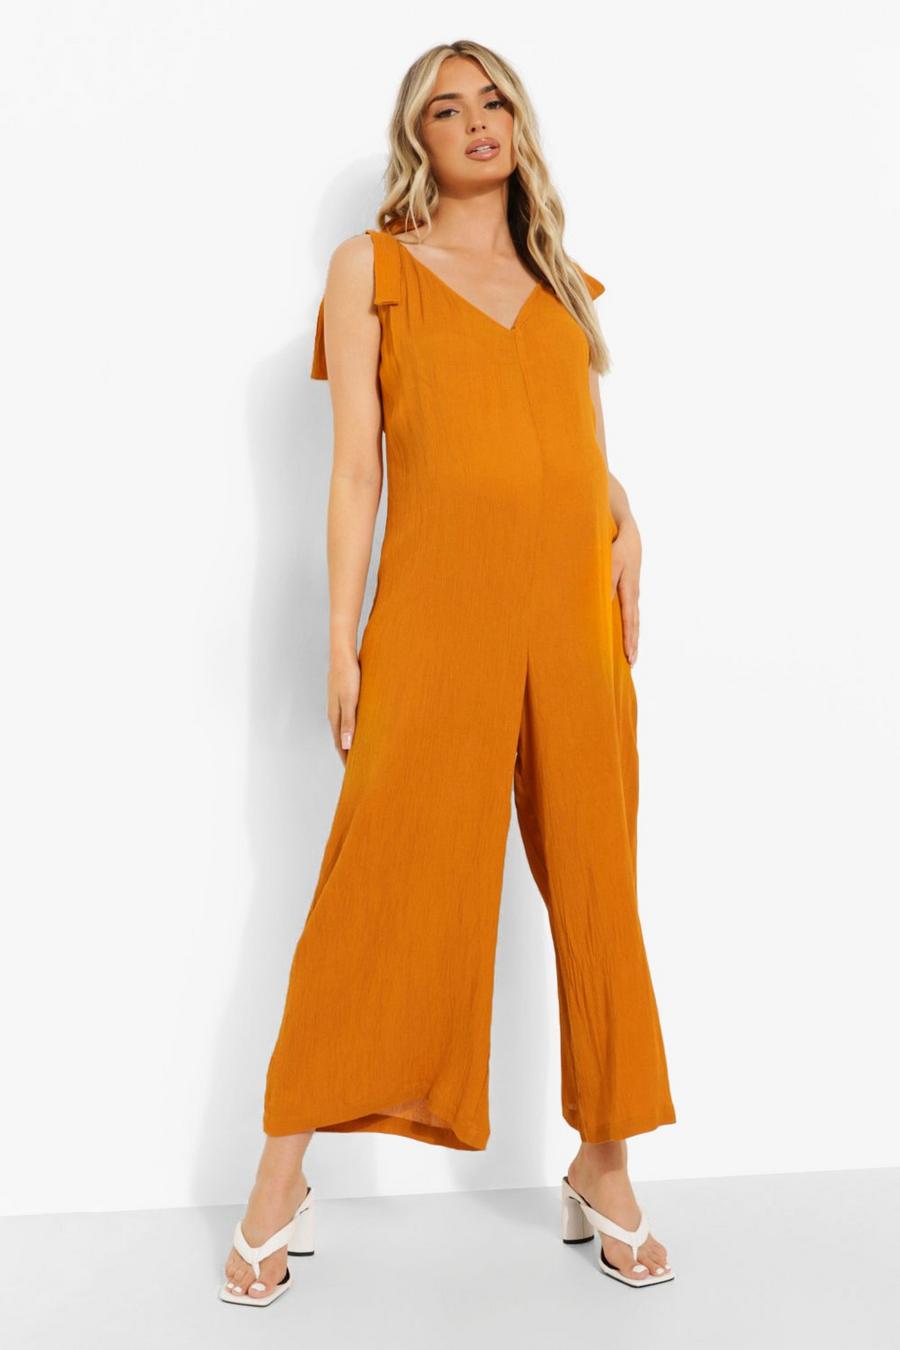 Mustard yellow Maternity Slouchy Tie Strap Jumpsuit